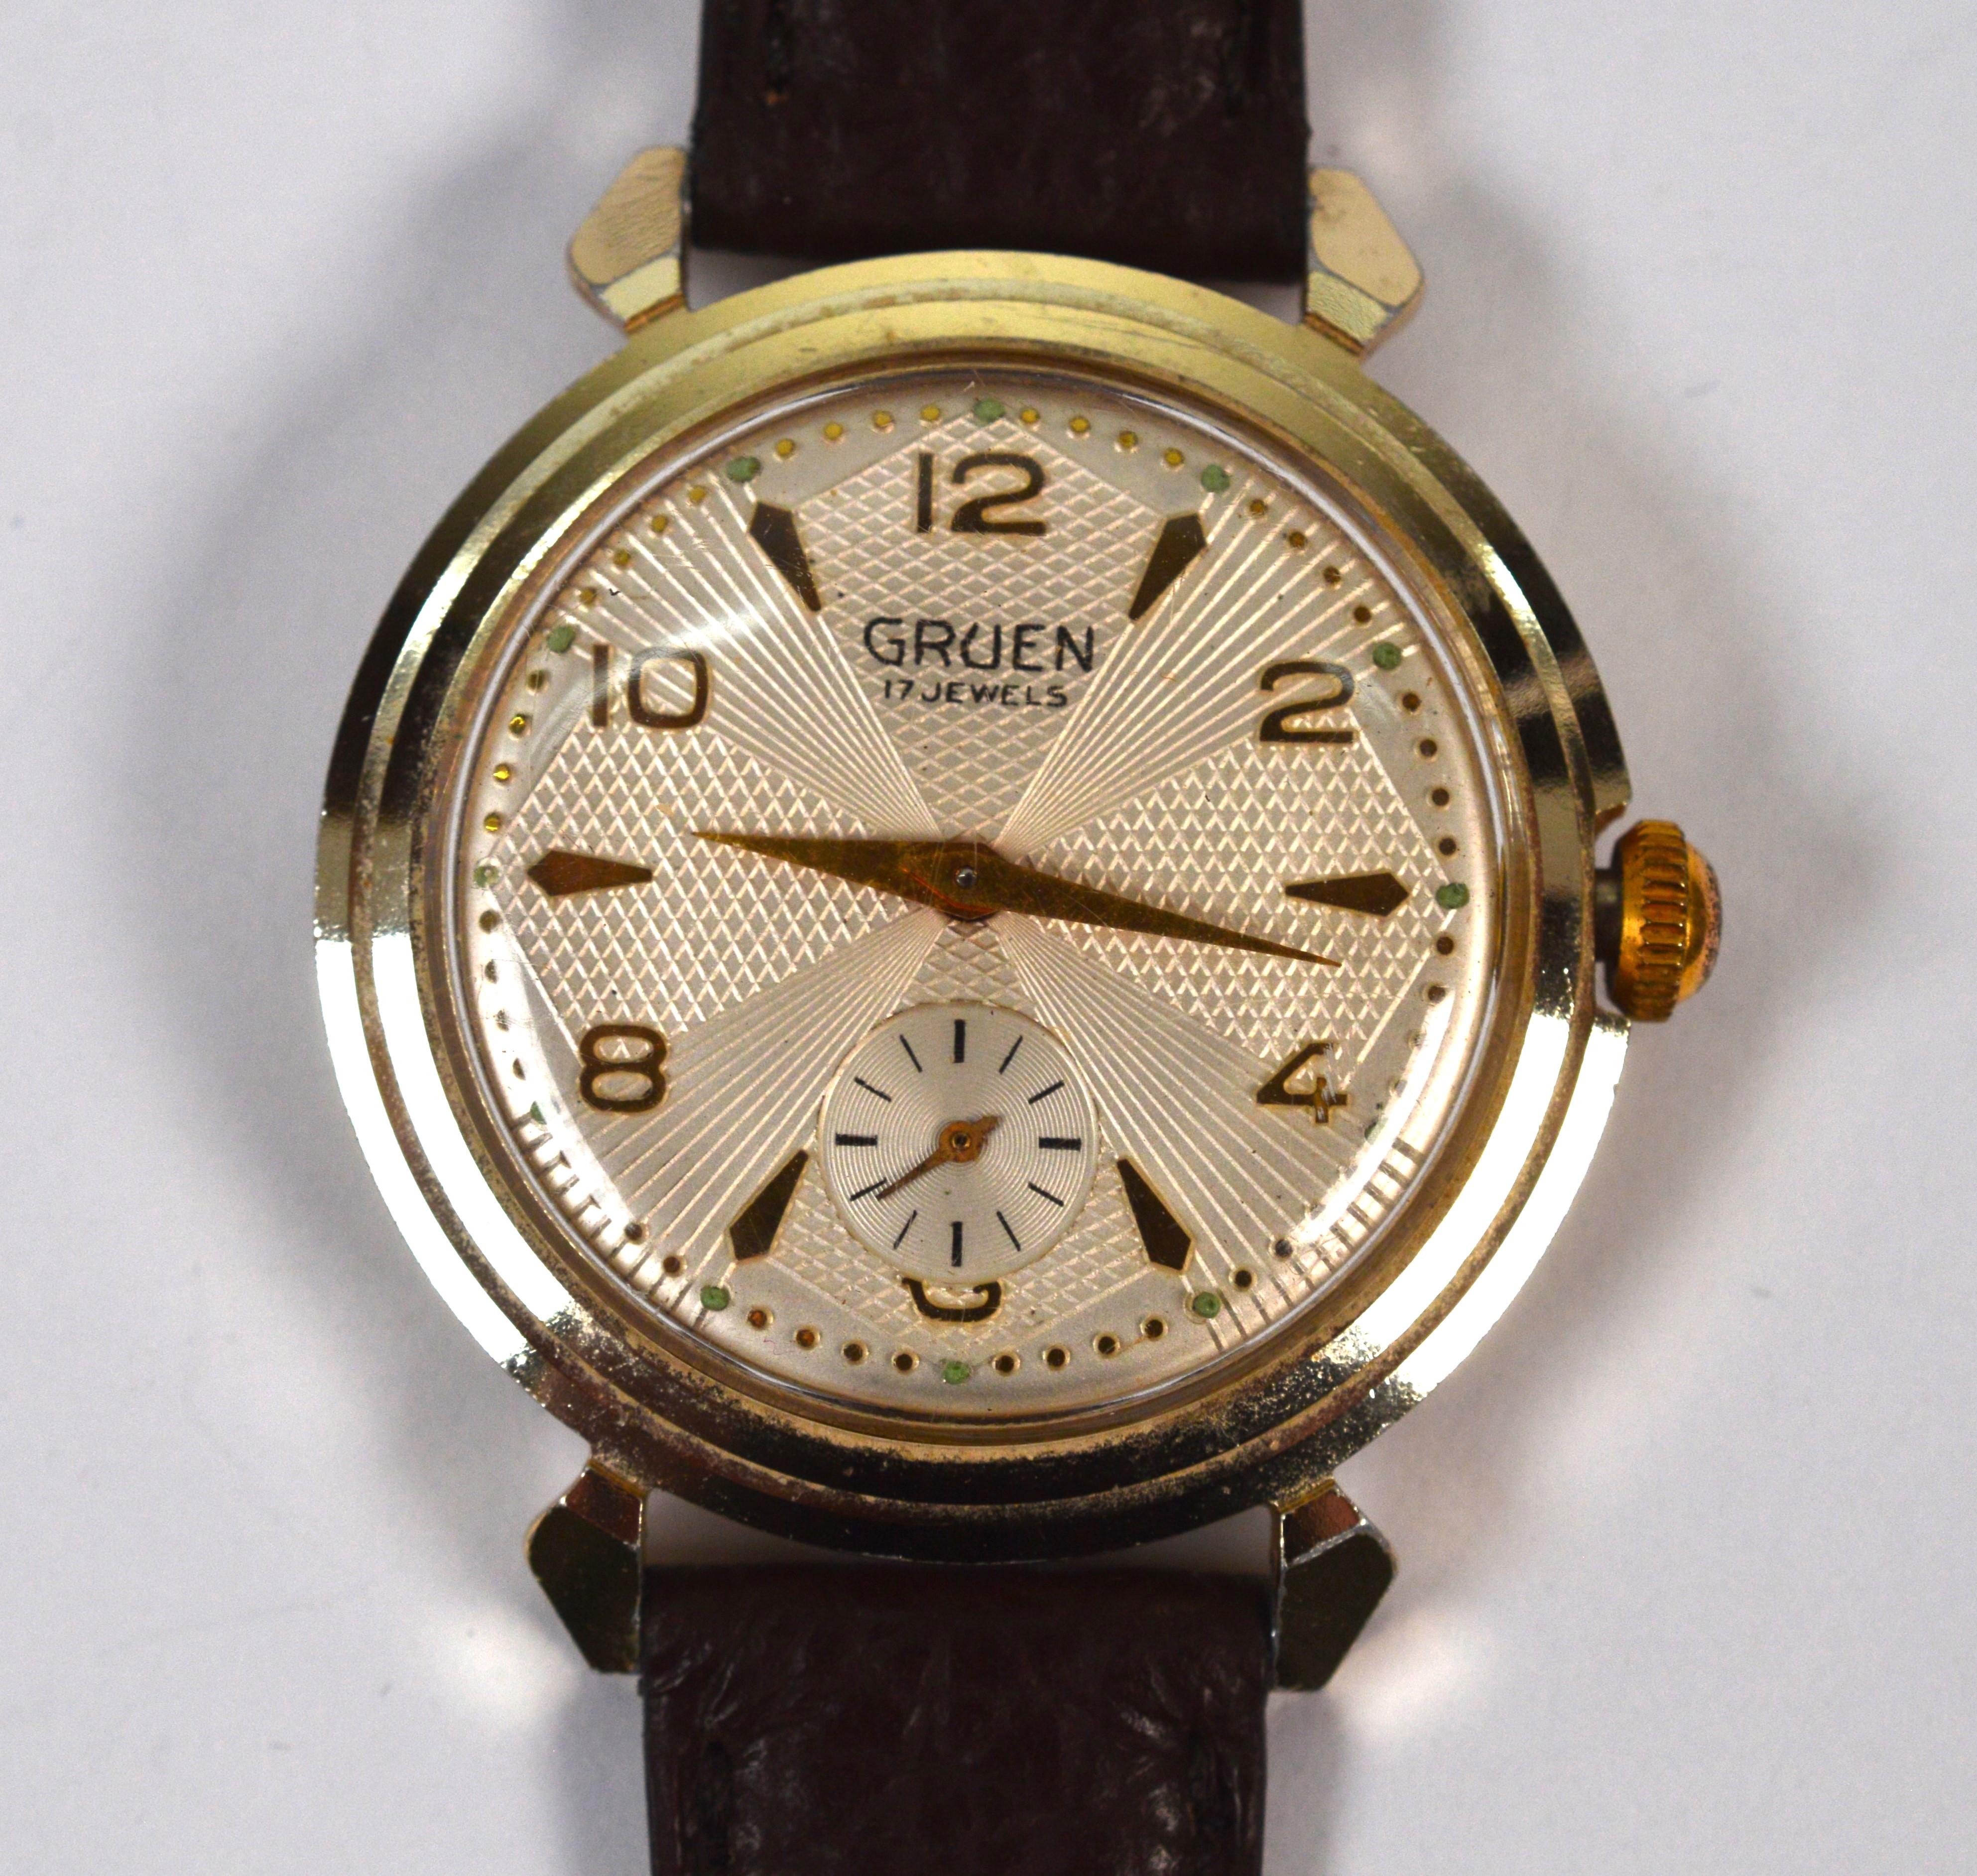 We love vintage timepieces and this one of our favorite finds by Gruen Watch. Circa 1940's and in amazing condition, this sharp looking Gruen 416 Swiss Wrist Watch is rarely seen. In size 34mm with a silver/copper front case and steel back case by